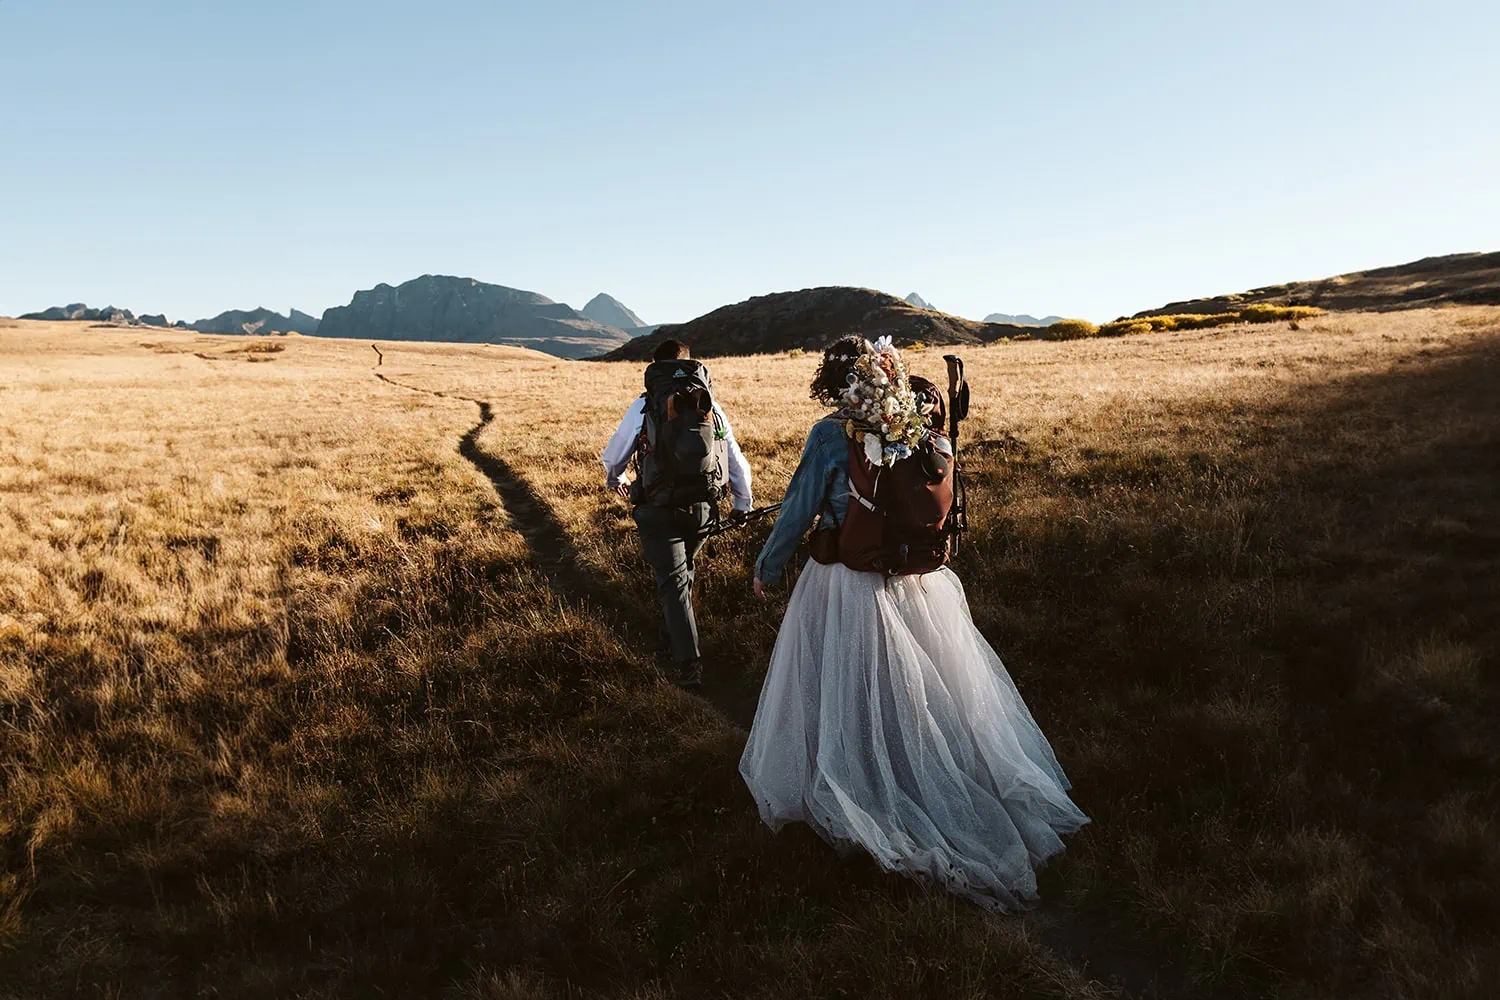 Adventure elopement photographed by Nina